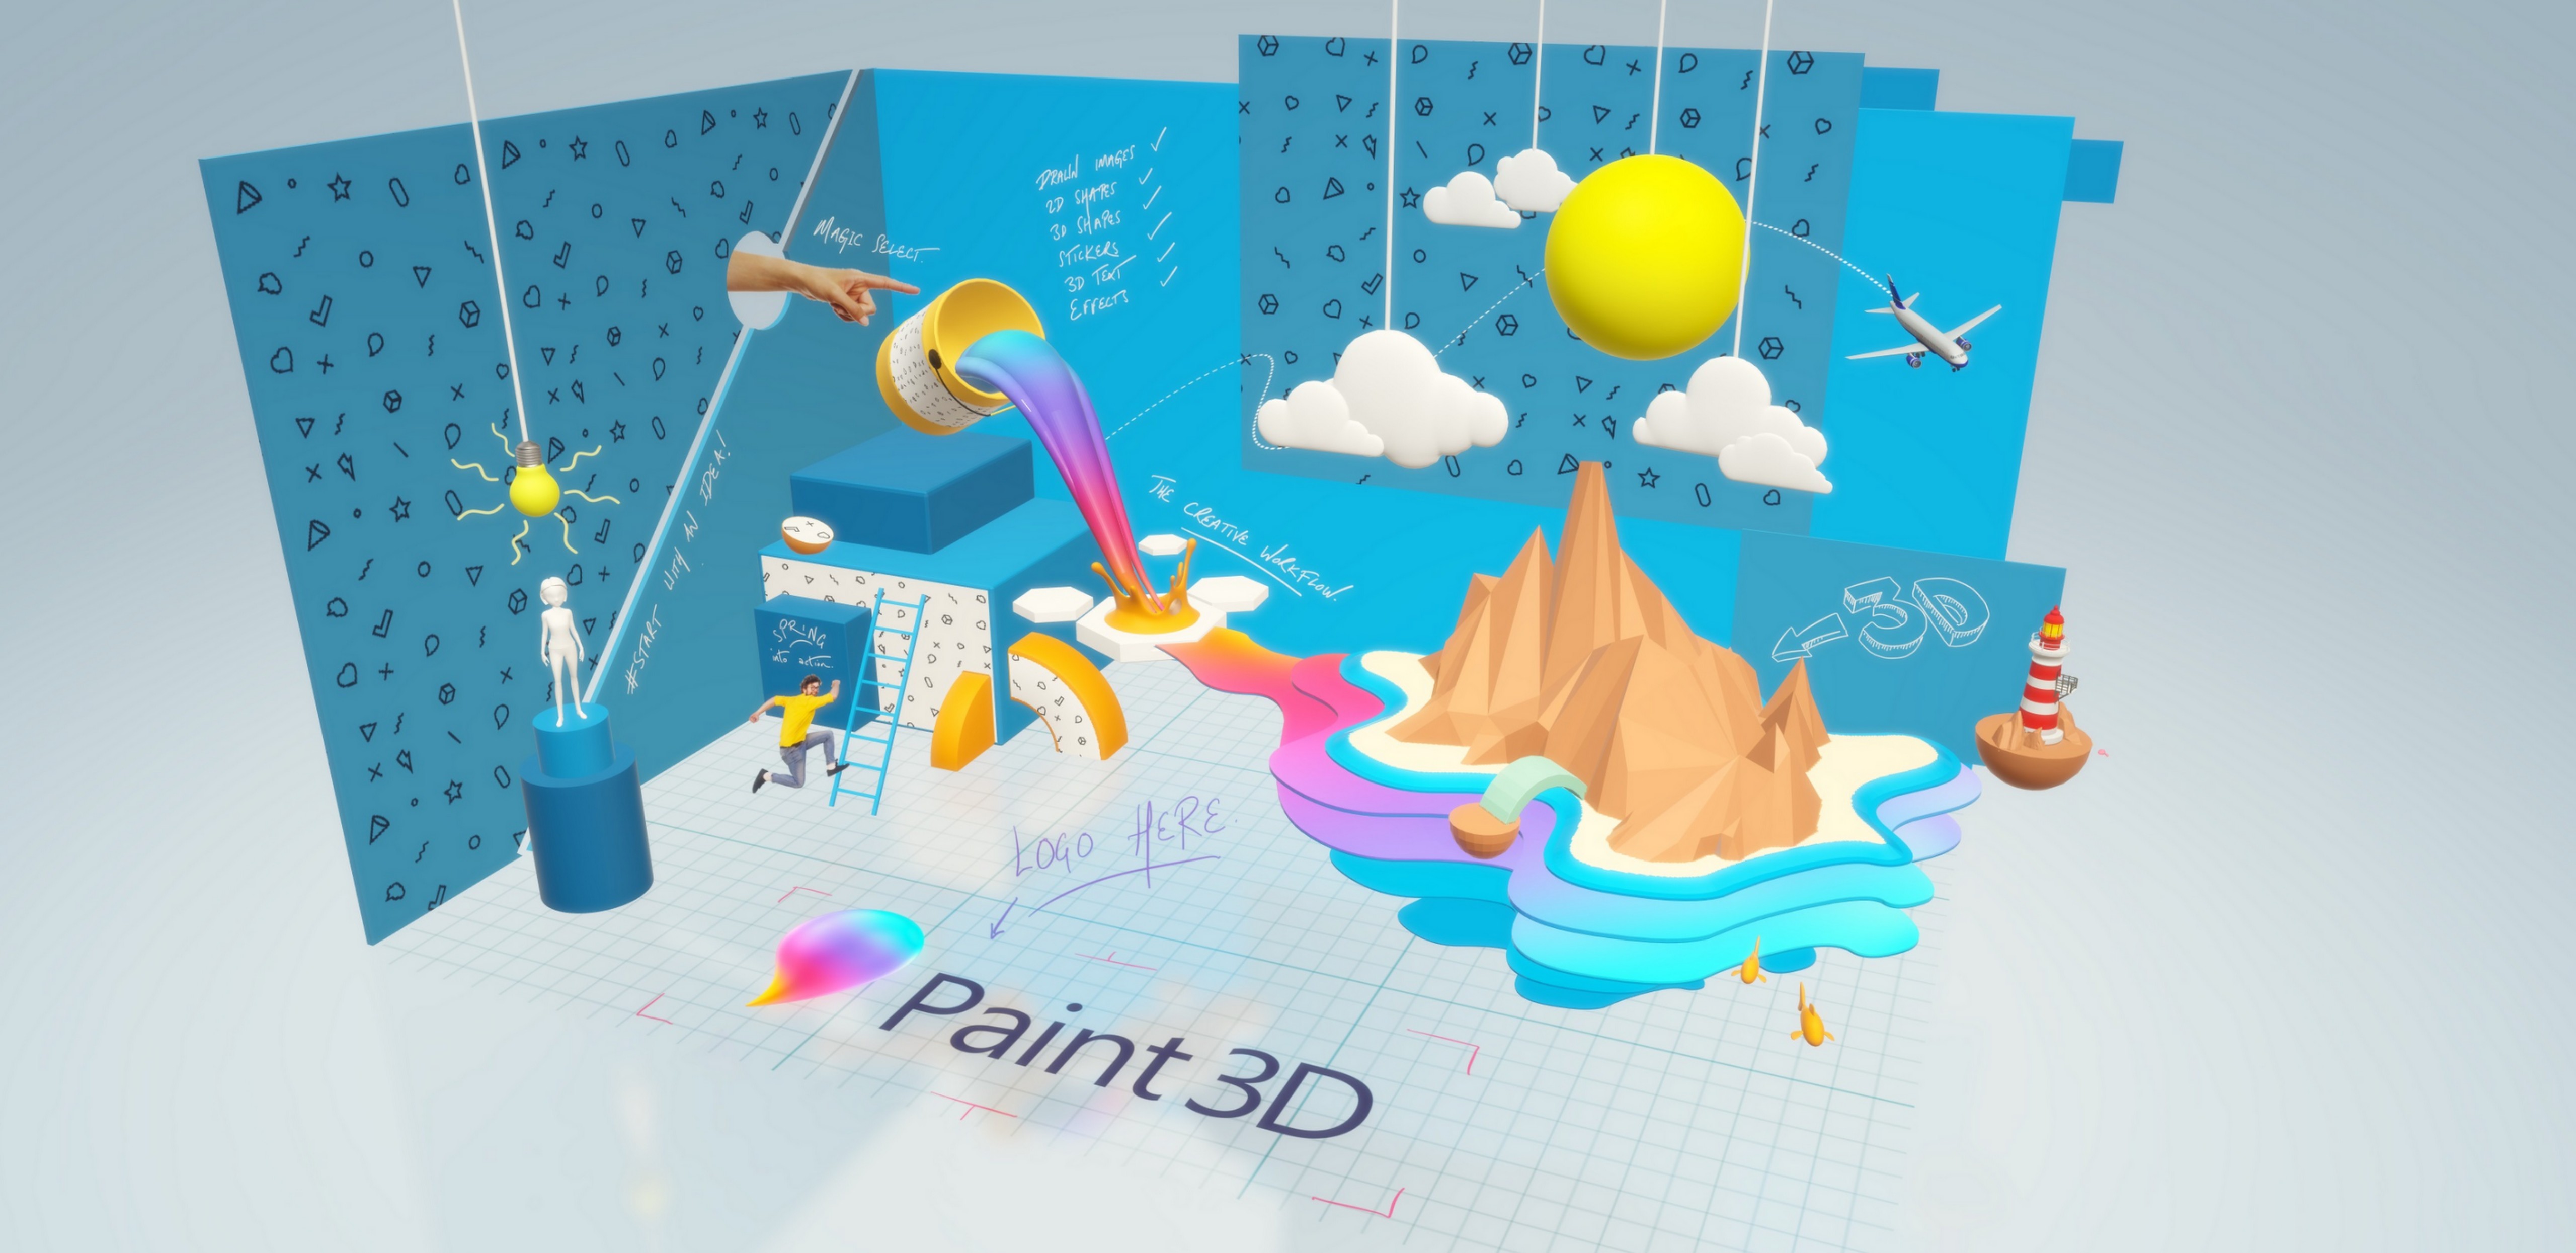 Windows 10 Tip: A guide to the basic tools in Paint 3D - Windows ...